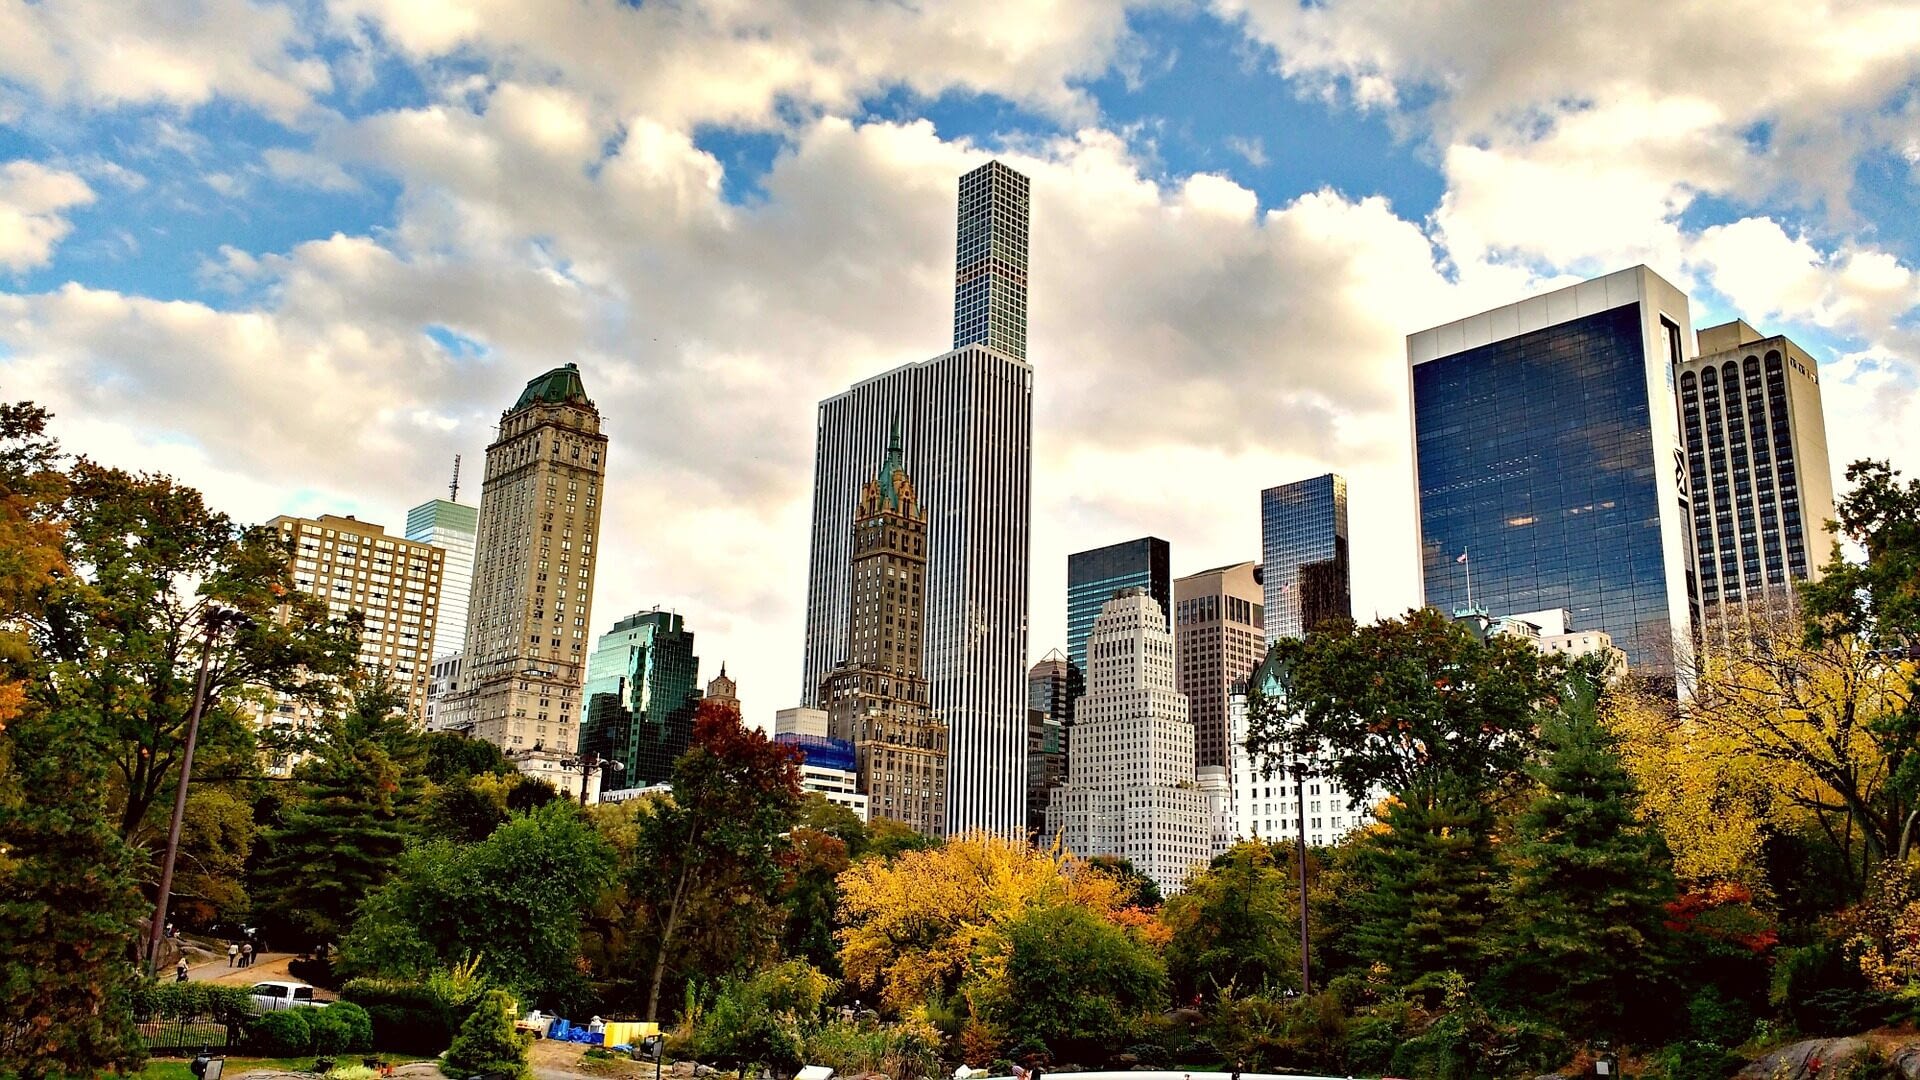 Image: New York City Skyline Above the Urban Forest of Central Park